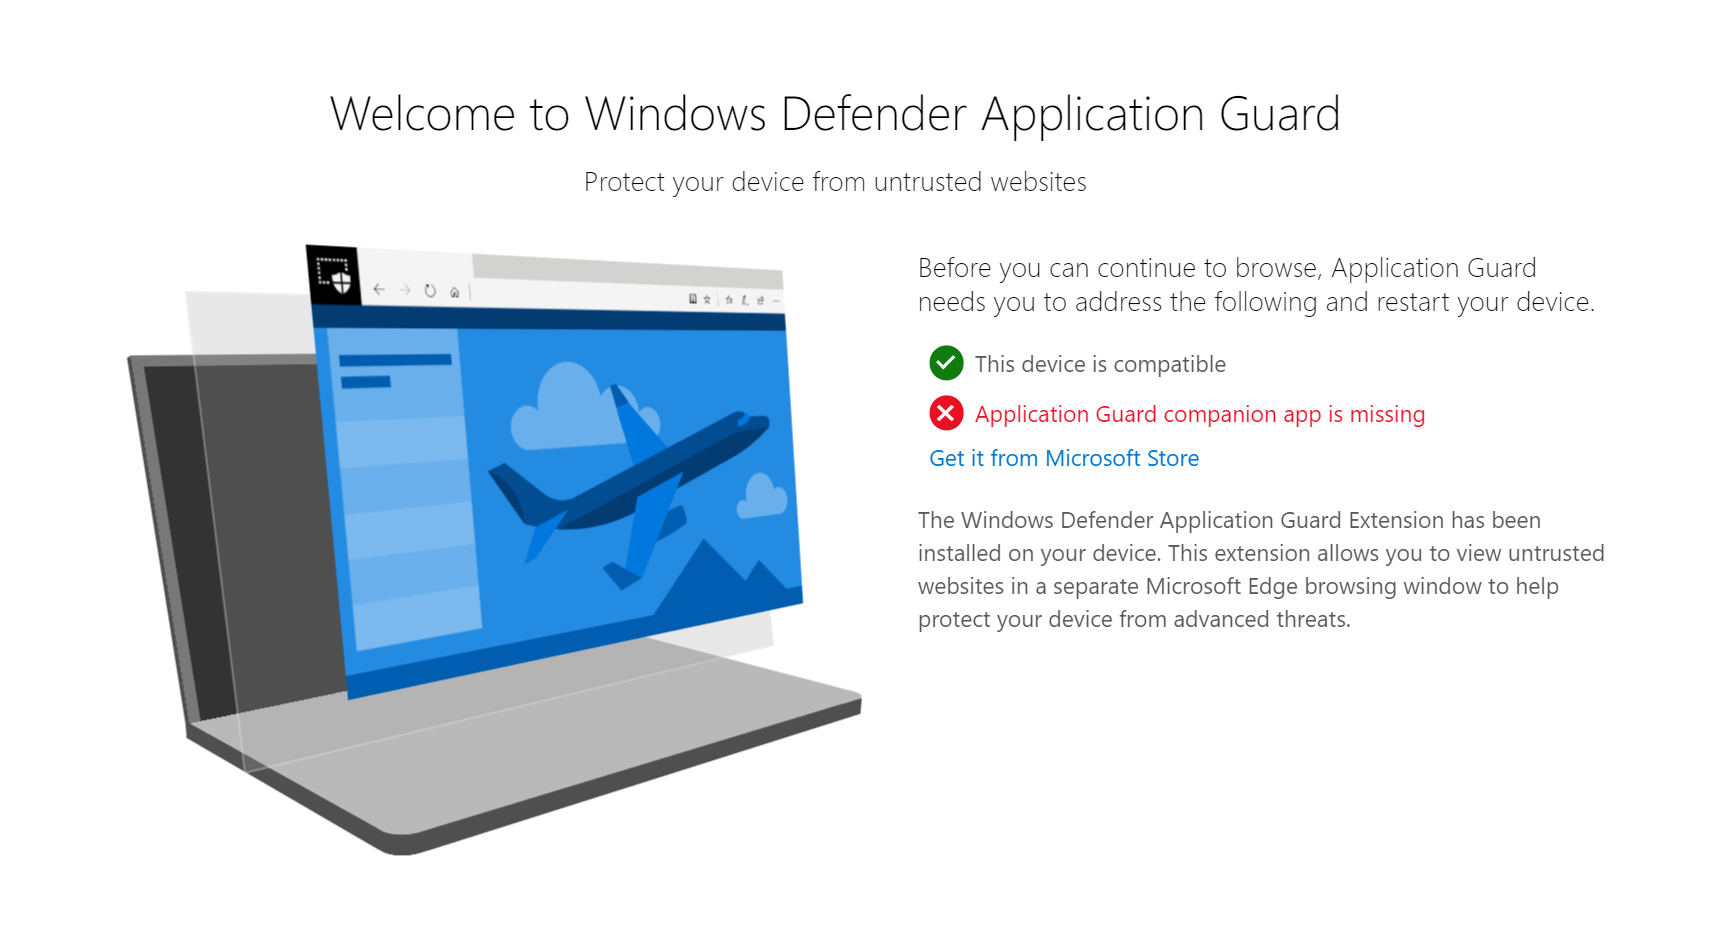 Windows Defender Application Guard - personal use windows-defender-application-guard-components-not-complete.png